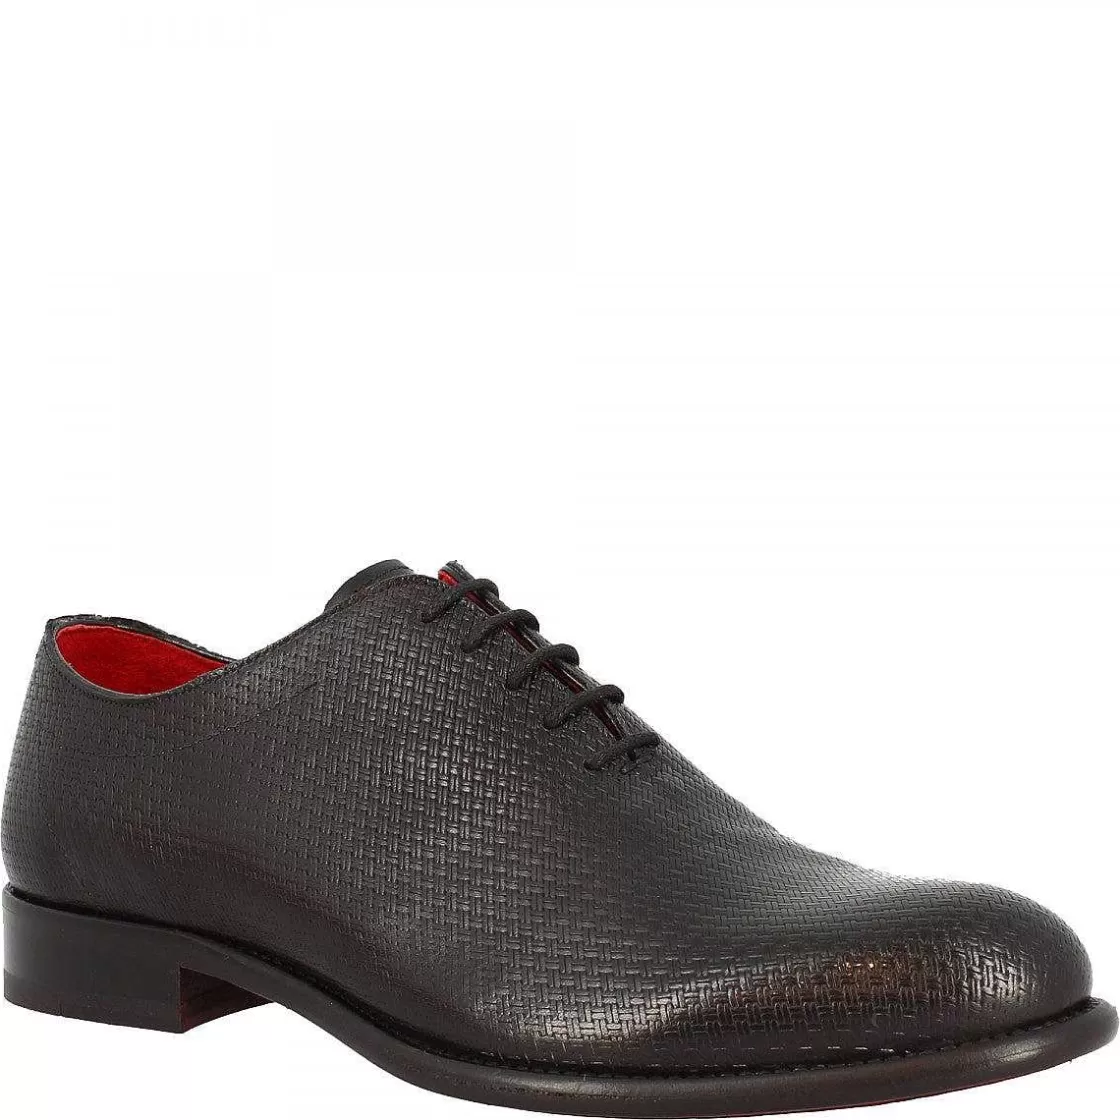 Leonardo Men'S Handmade Round Toe Brogues Shoes In Black Montecarlo Calf Leather Outlet